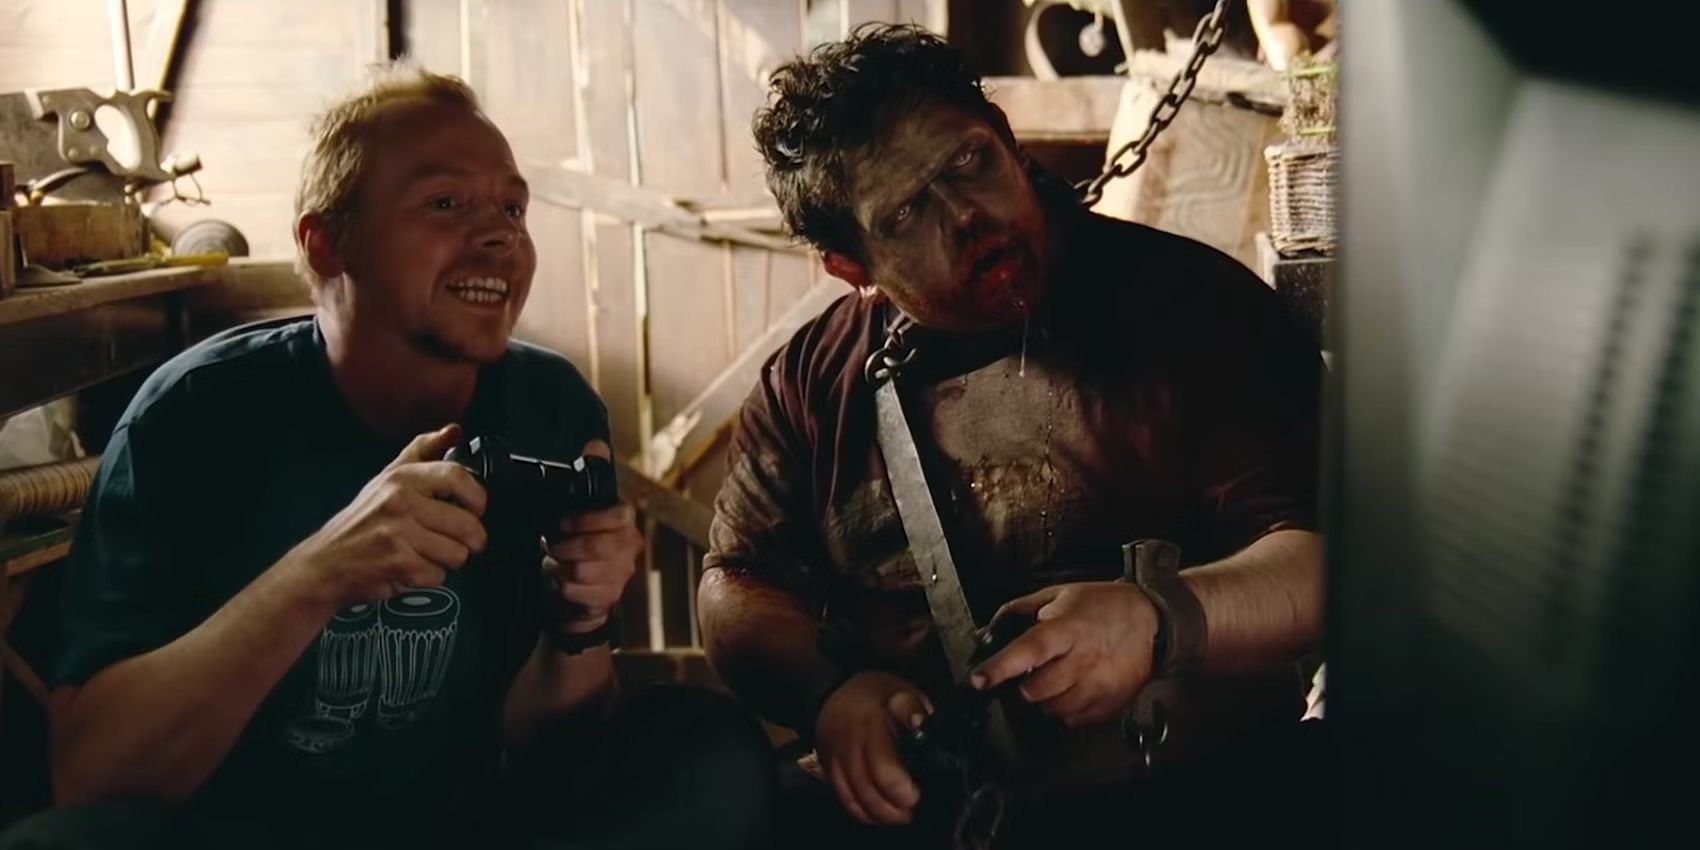 Shaun and zombie Ed play video games in Shaun of the Dead